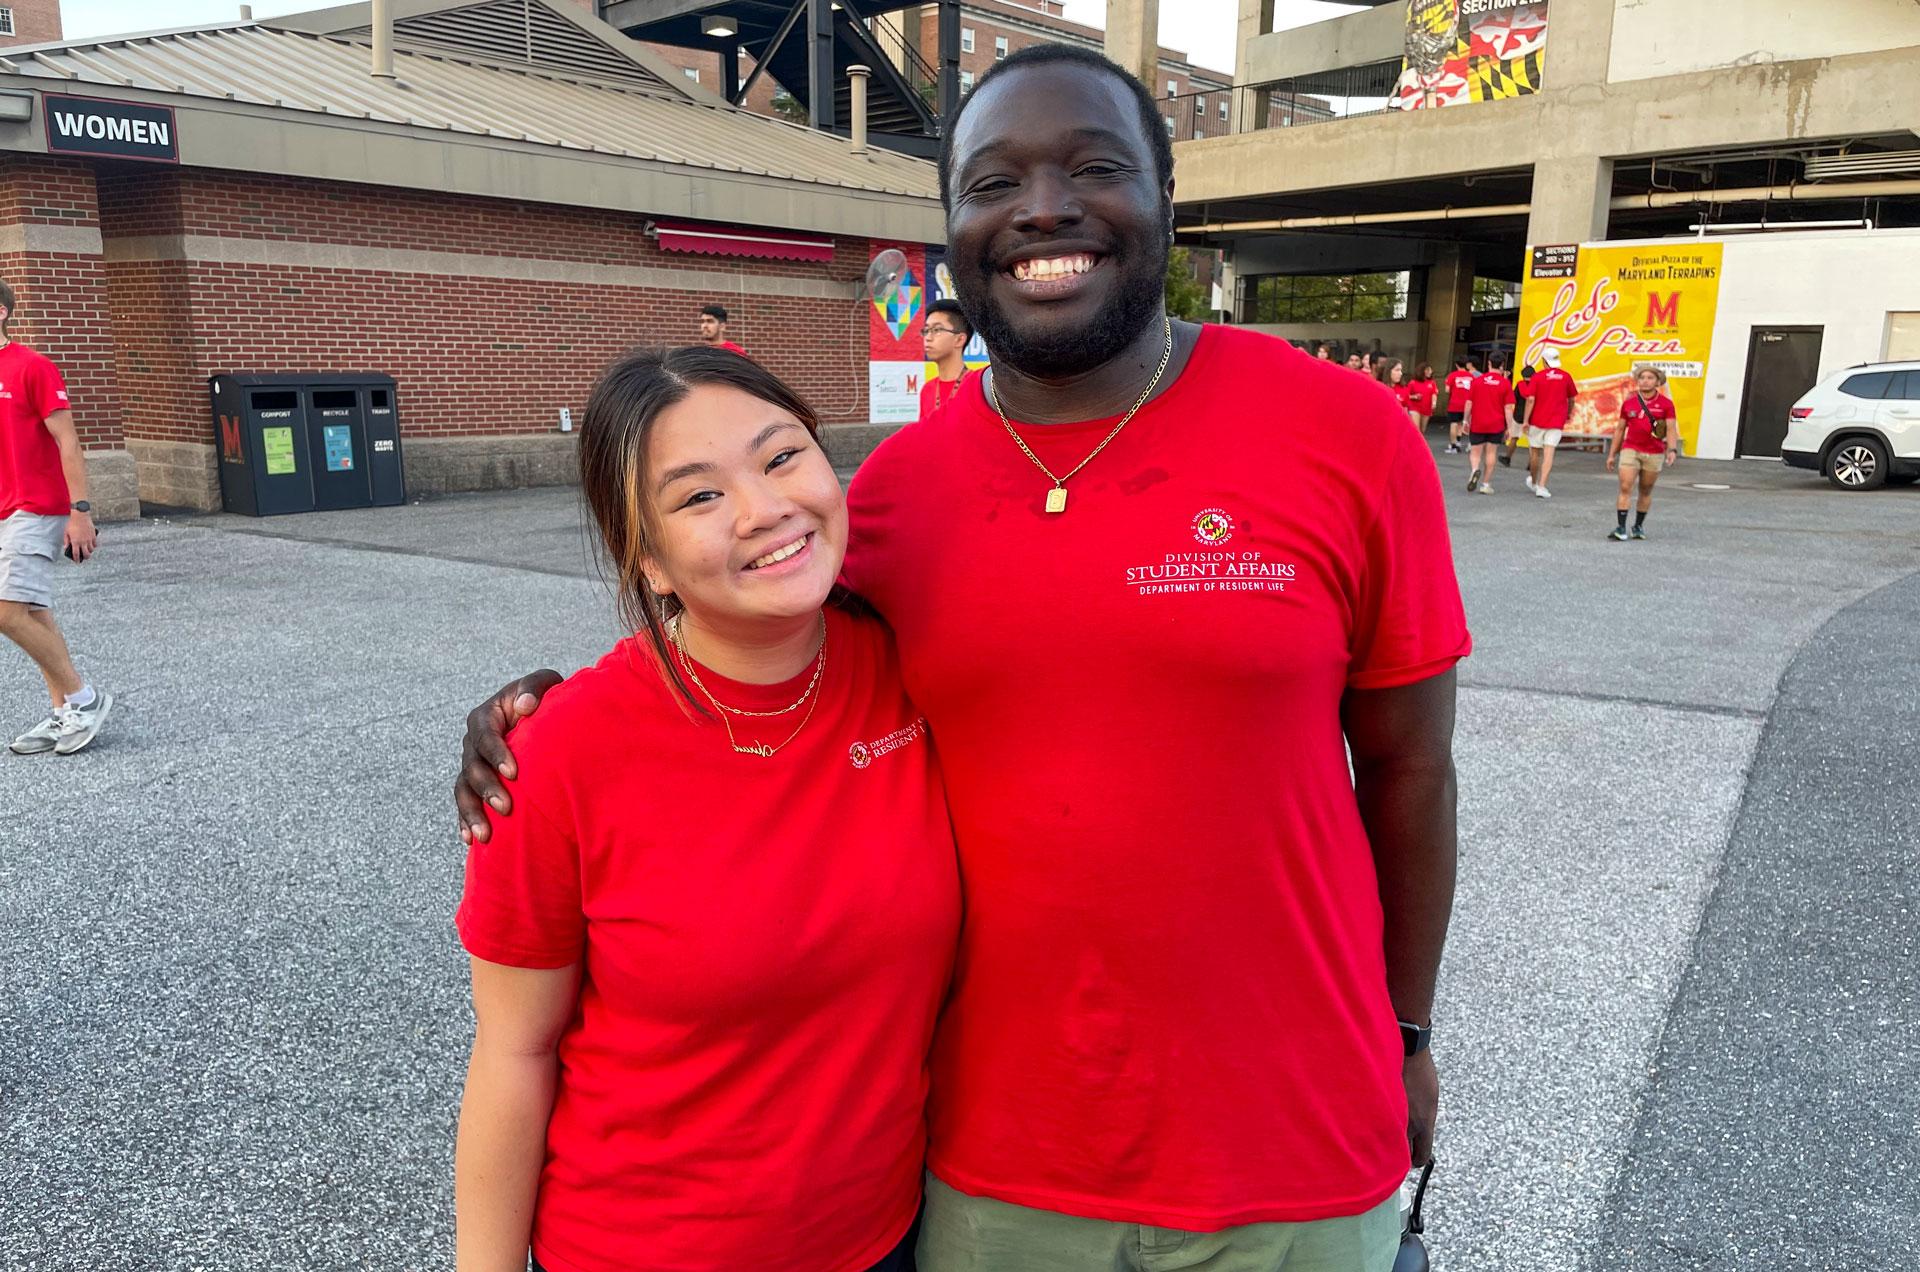 two resident life graduate assistants wearing red shirts during the Big Show event